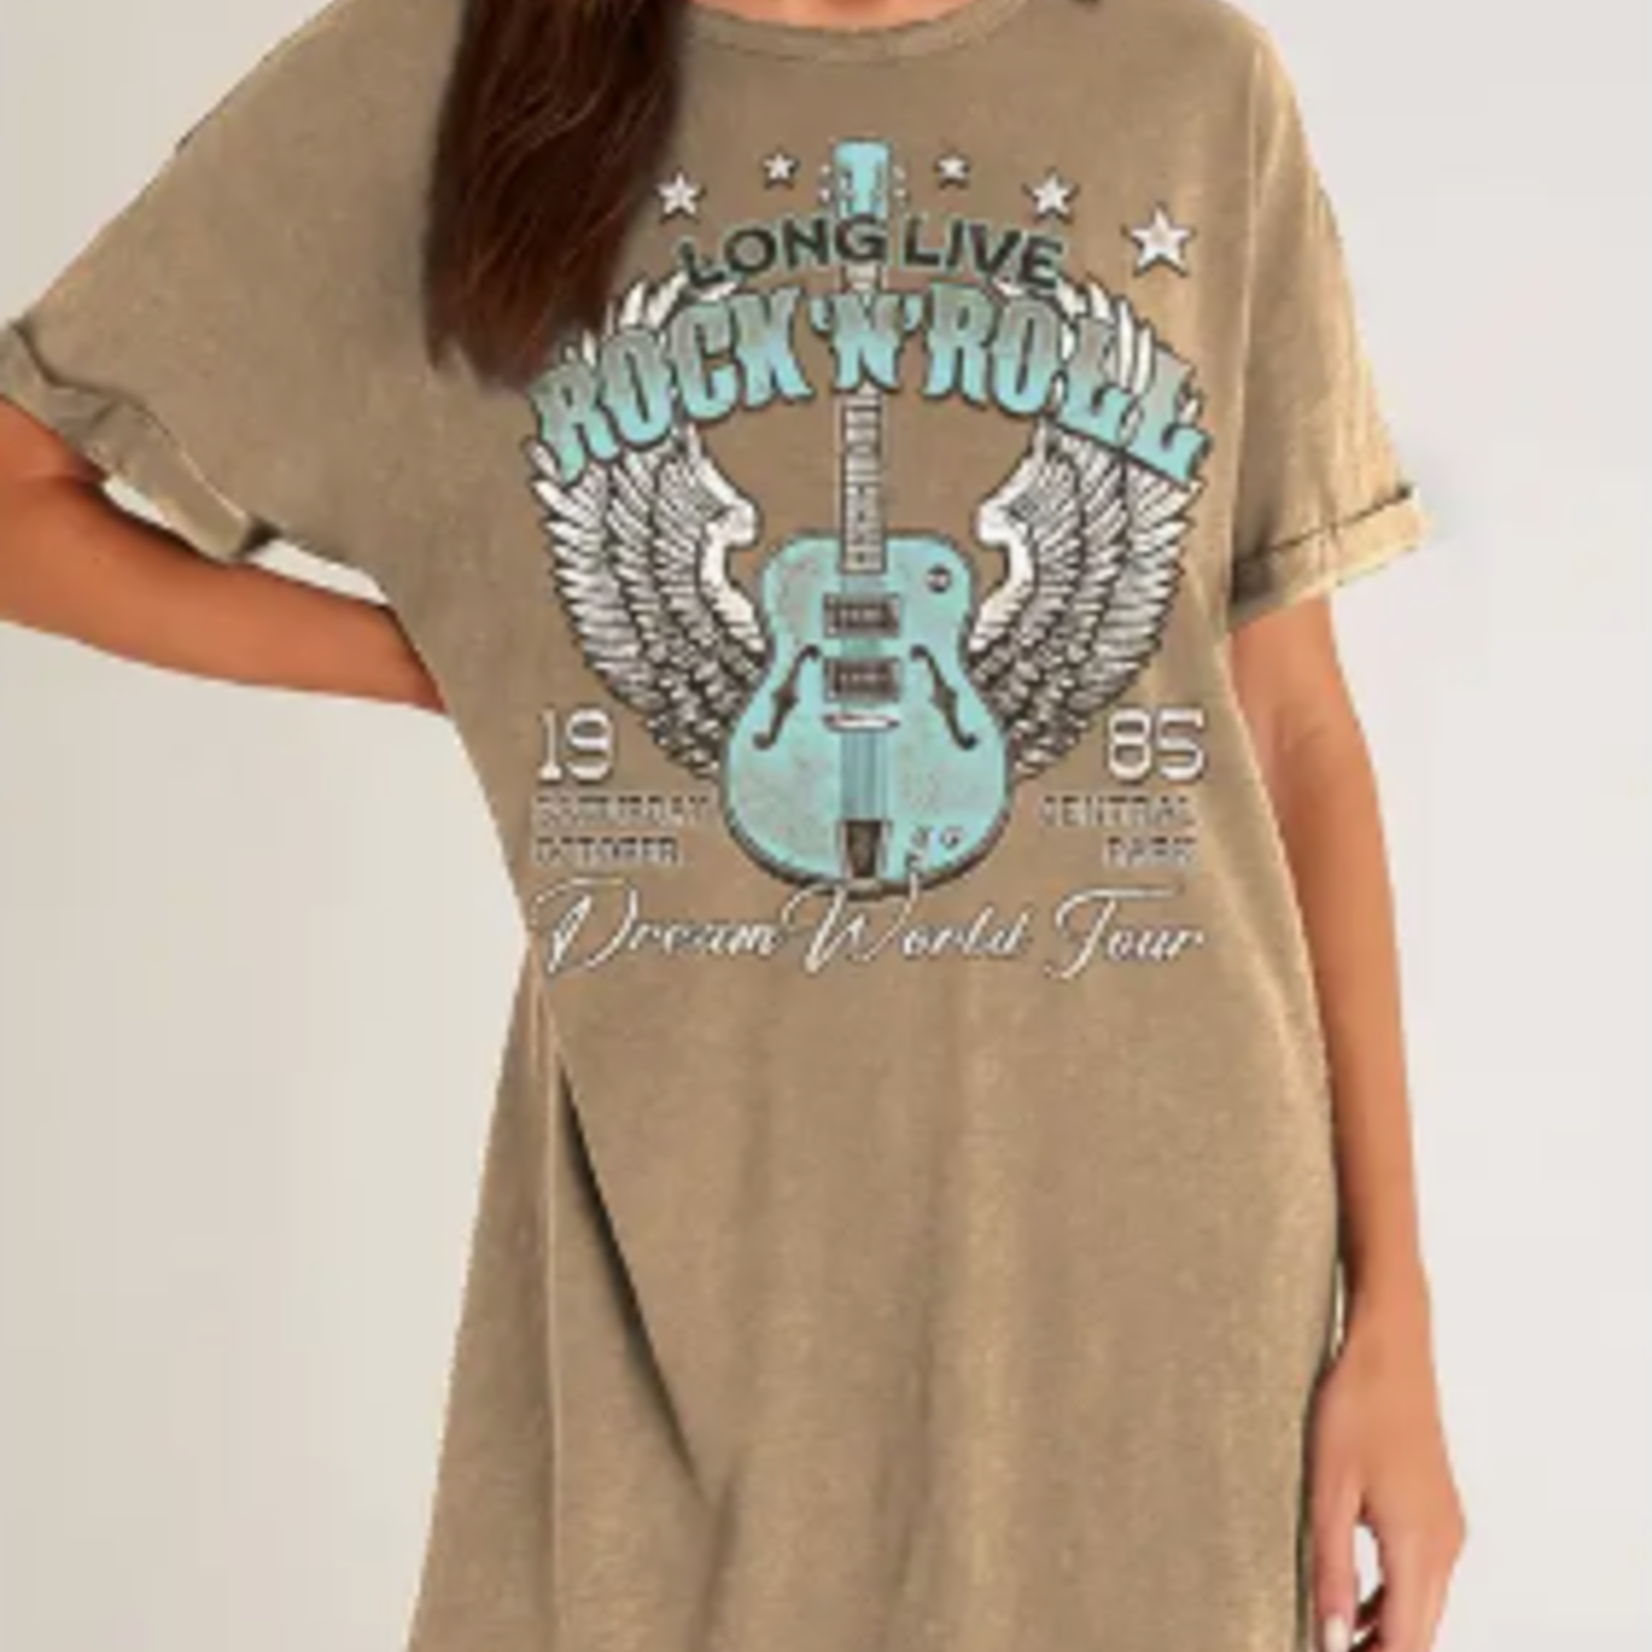 HRTandLUV Long Live Rock N ROLL Mineral Graphic Dress